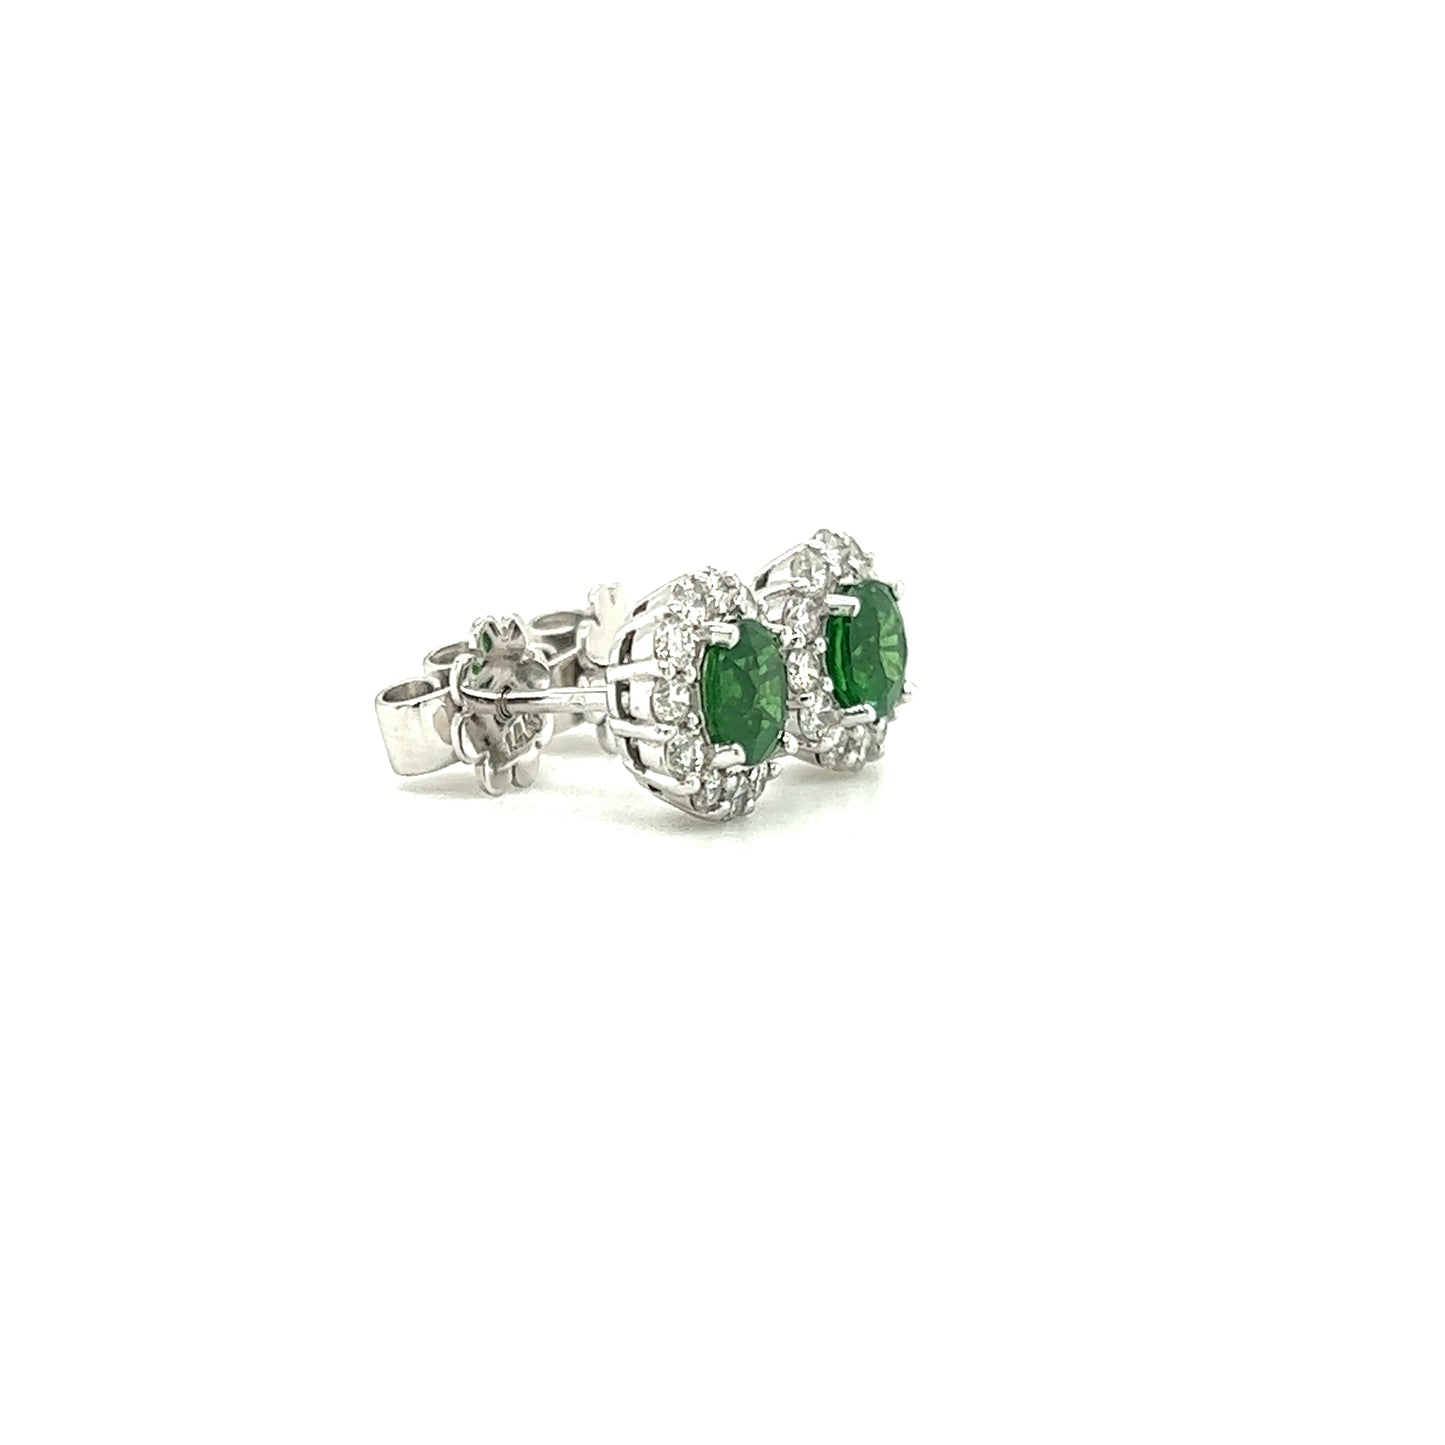 Round Tsavorite Stud Earrings with 0.56ctw of Diamonds in 14K White Gold Left Side View